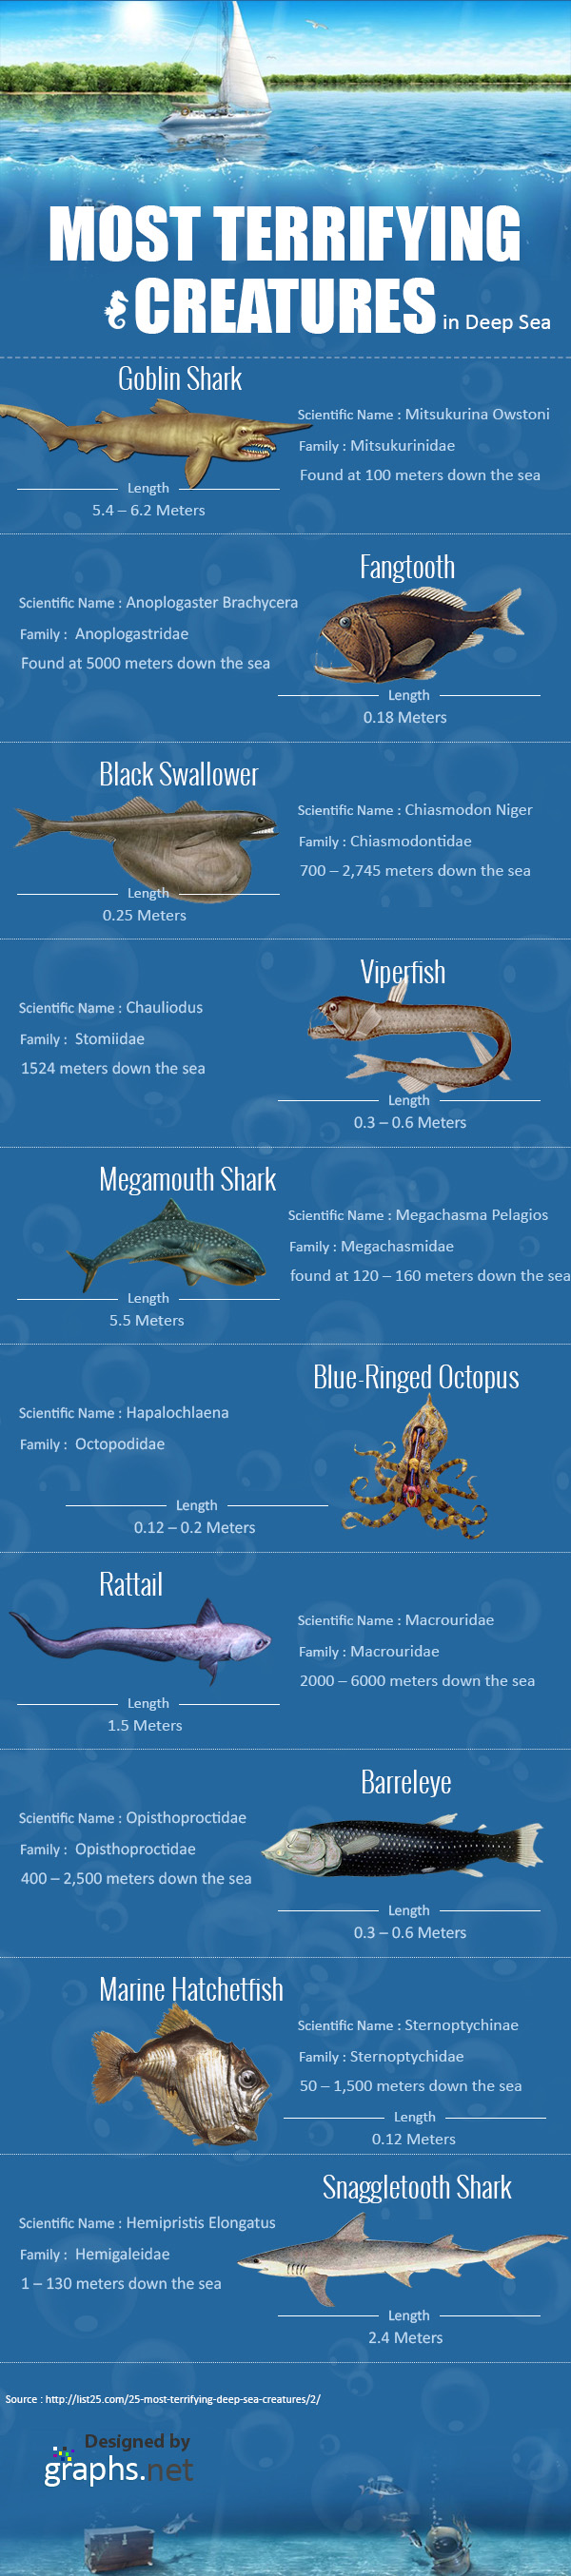 Most Terrifying Creatures in the Deep Sea